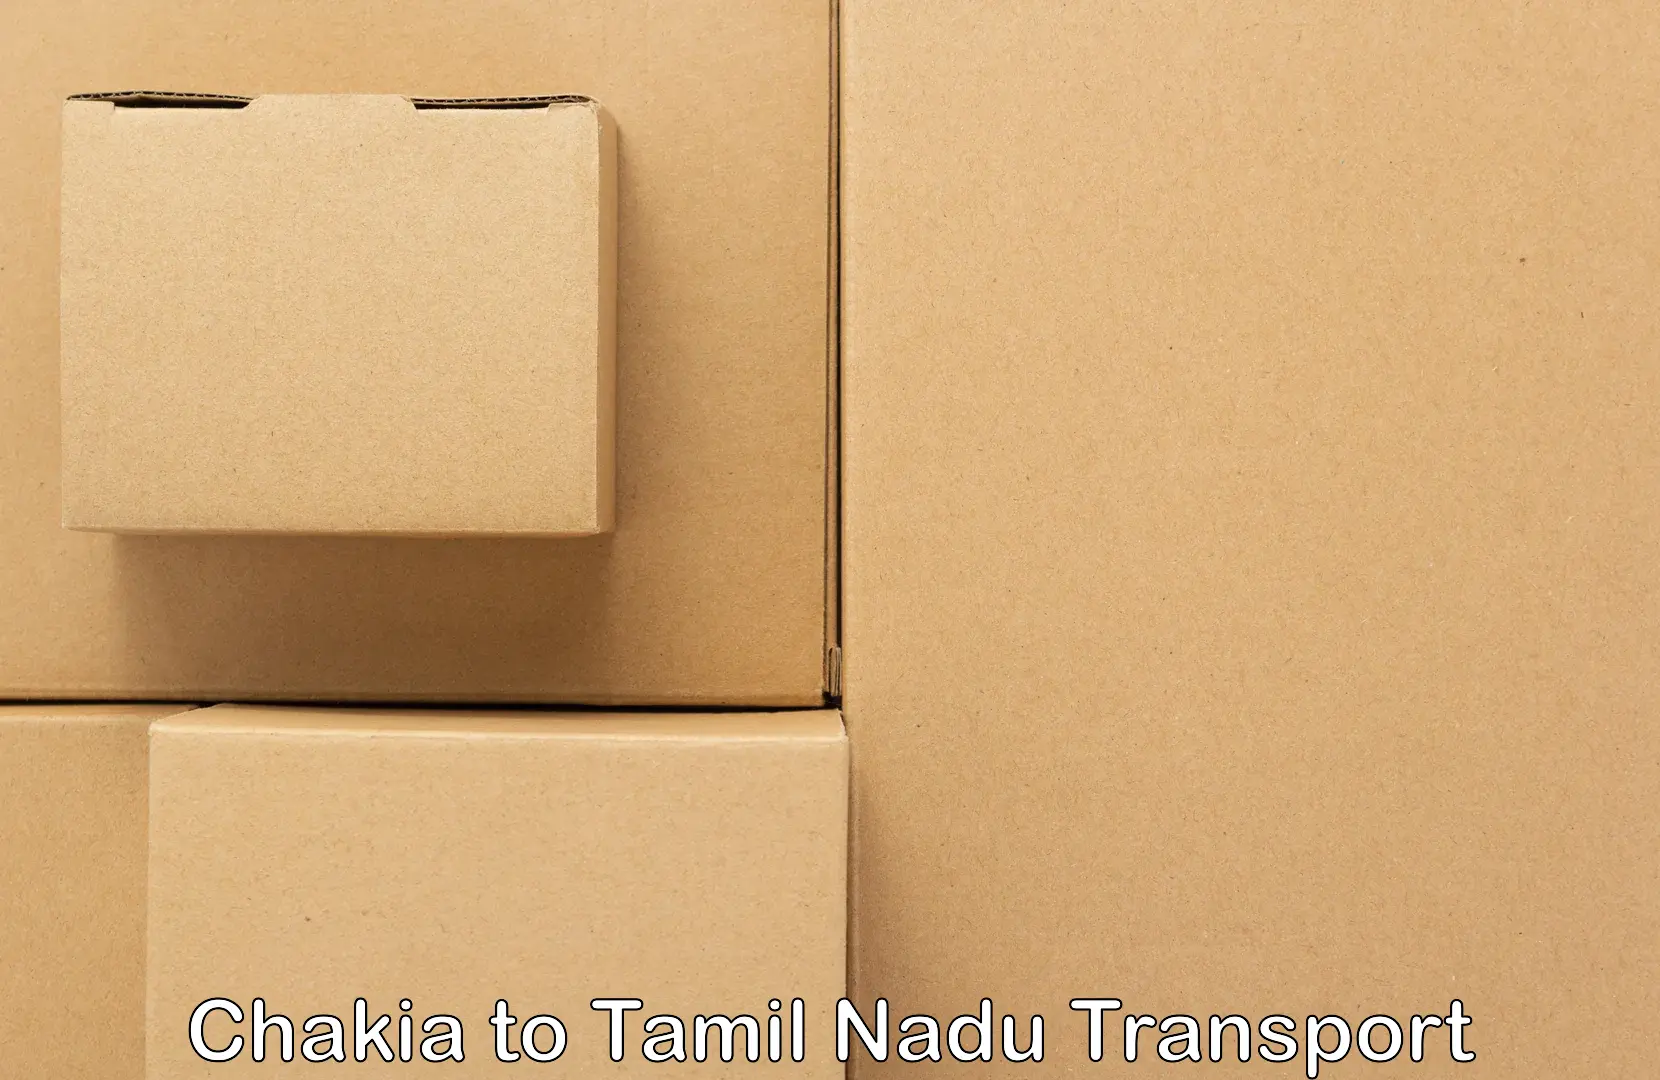 Nationwide transport services Chakia to Surandai